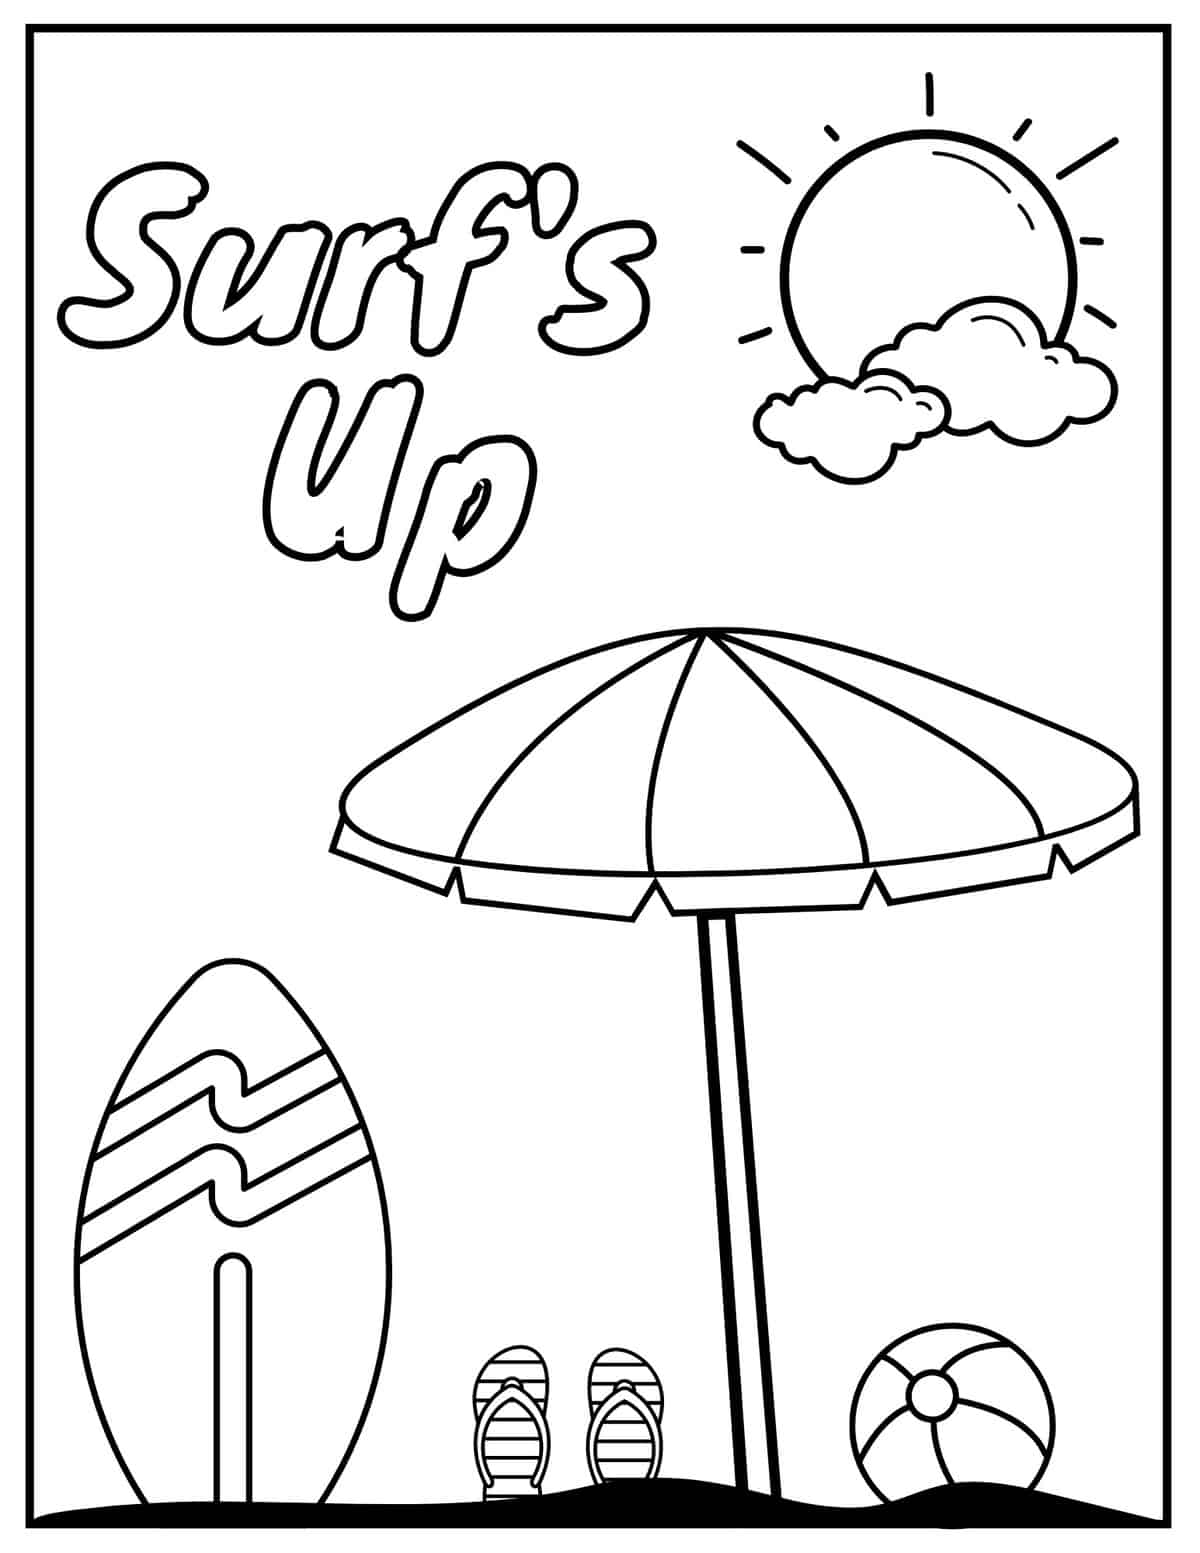 surf's up coloring sheet